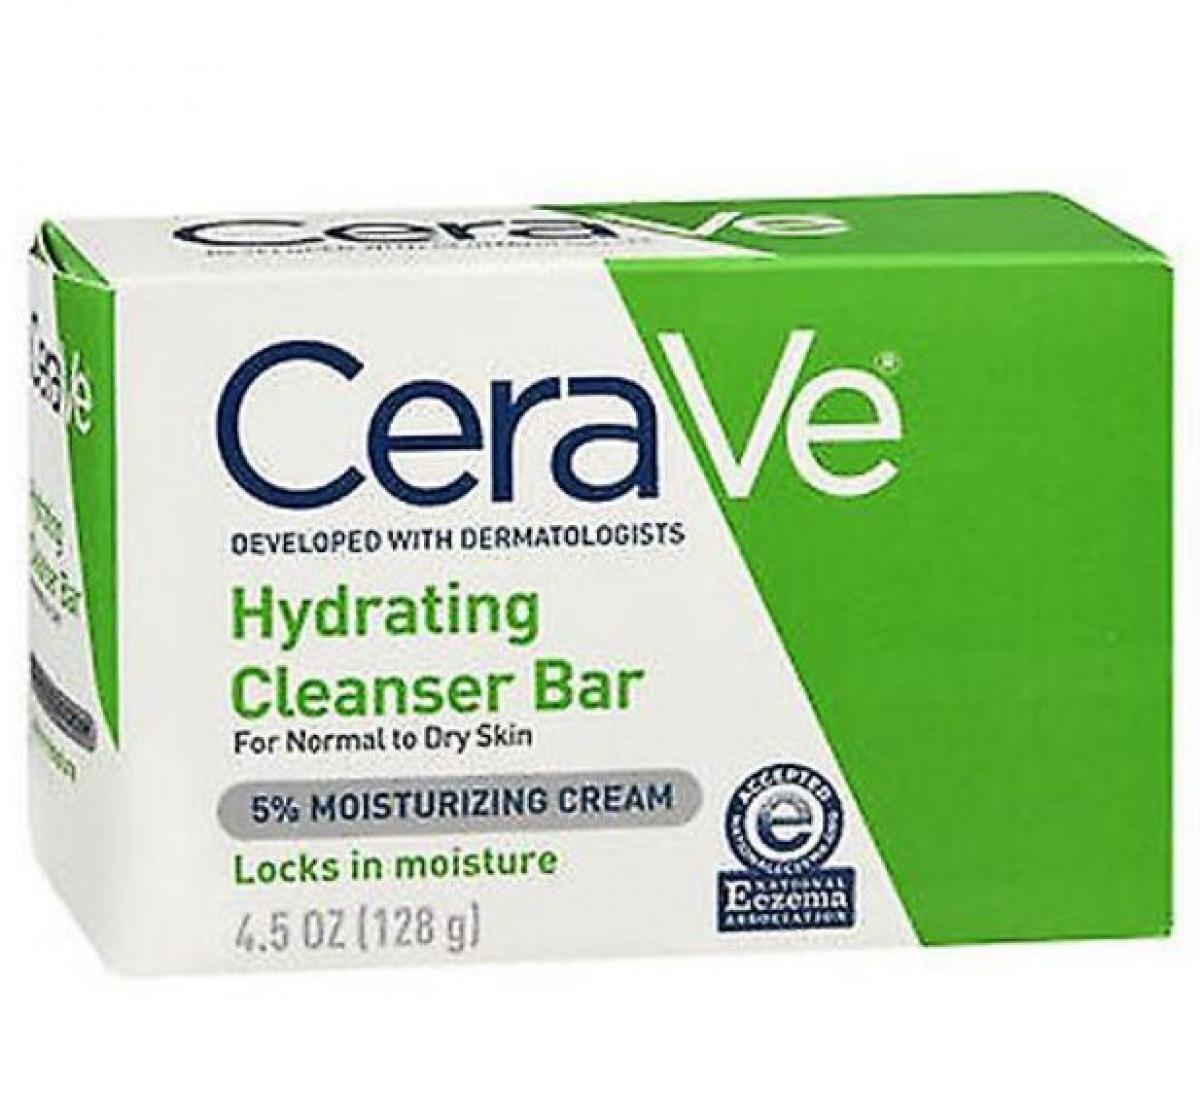 Cerave hydrating cleanser bar 